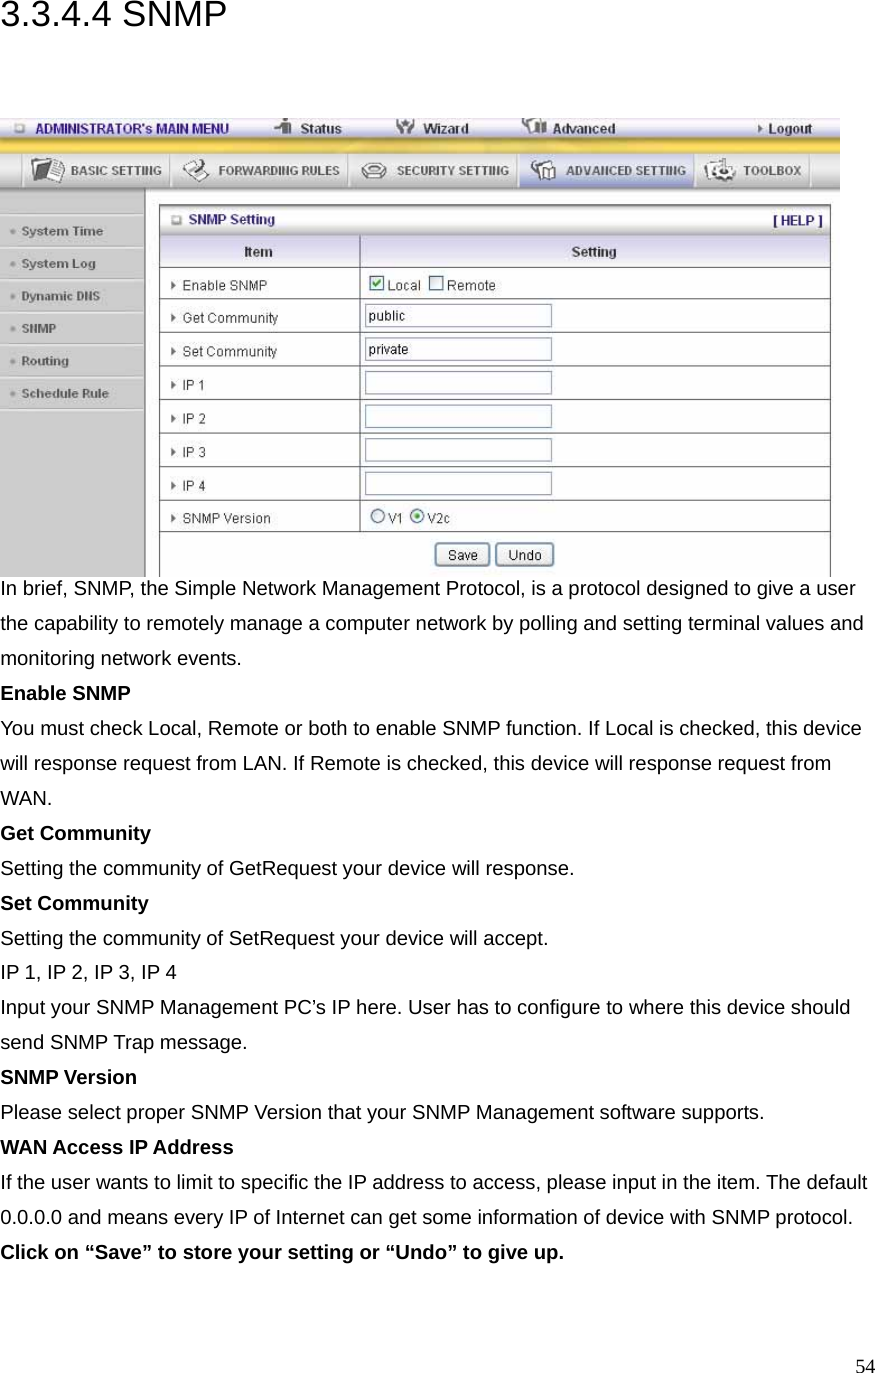  543.3.4.4 SNMP  In brief, SNMP, the Simple Network Management Protocol, is a protocol designed to give a user the capability to remotely manage a computer network by polling and setting terminal values and monitoring network events.   Enable SNMP You must check Local, Remote or both to enable SNMP function. If Local is checked, this device will response request from LAN. If Remote is checked, this device will response request from WAN.  Get Community Setting the community of GetRequest your device will response.   Set Community Setting the community of SetRequest your device will accept.   IP 1, IP 2, IP 3, IP 4 Input your SNMP Management PC’s IP here. User has to configure to where this device should send SNMP Trap message. SNMP Version Please select proper SNMP Version that your SNMP Management software supports. WAN Access IP Address   If the user wants to limit to specific the IP address to access, please input in the item. The default 0.0.0.0 and means every IP of Internet can get some information of device with SNMP protocol.   Click on “Save” to store your setting or “Undo” to give up.  